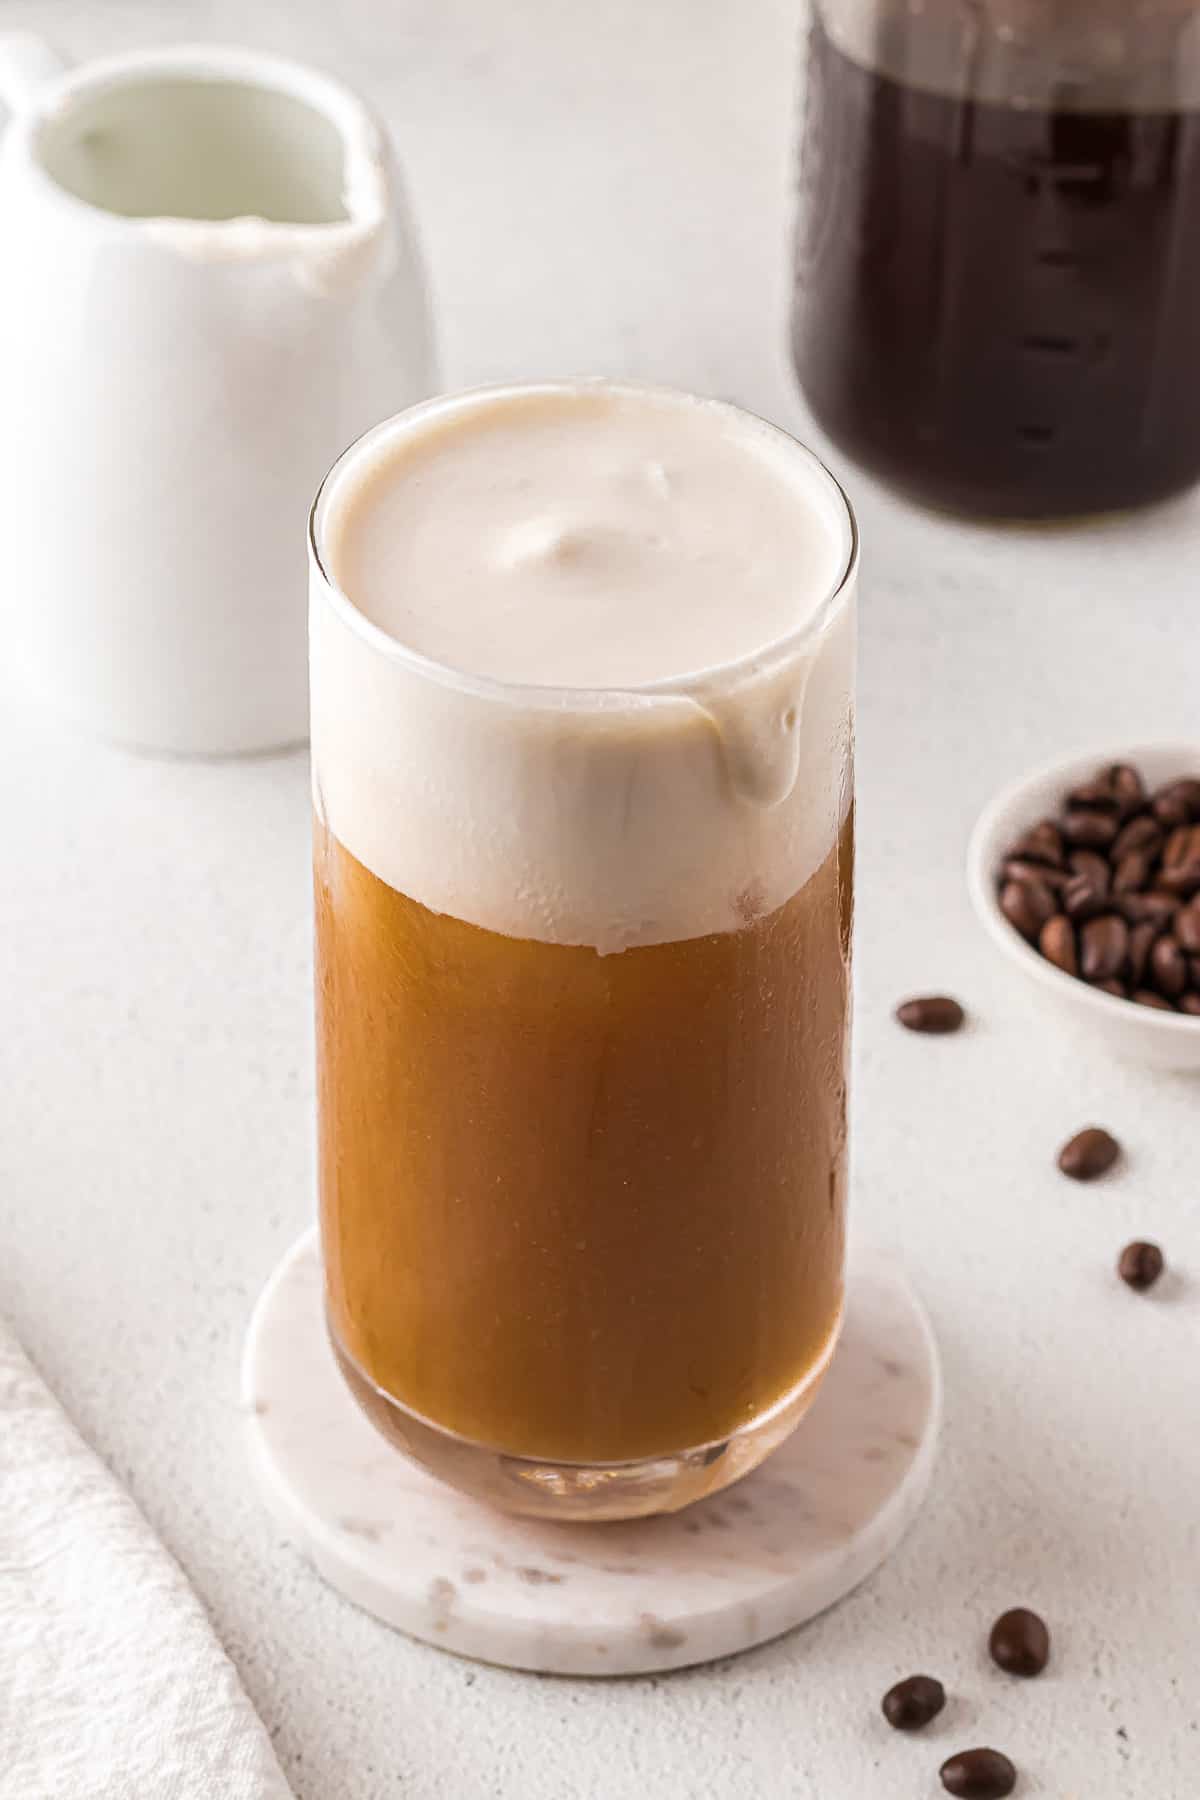 Dairy-free cold foam over iced coffee.